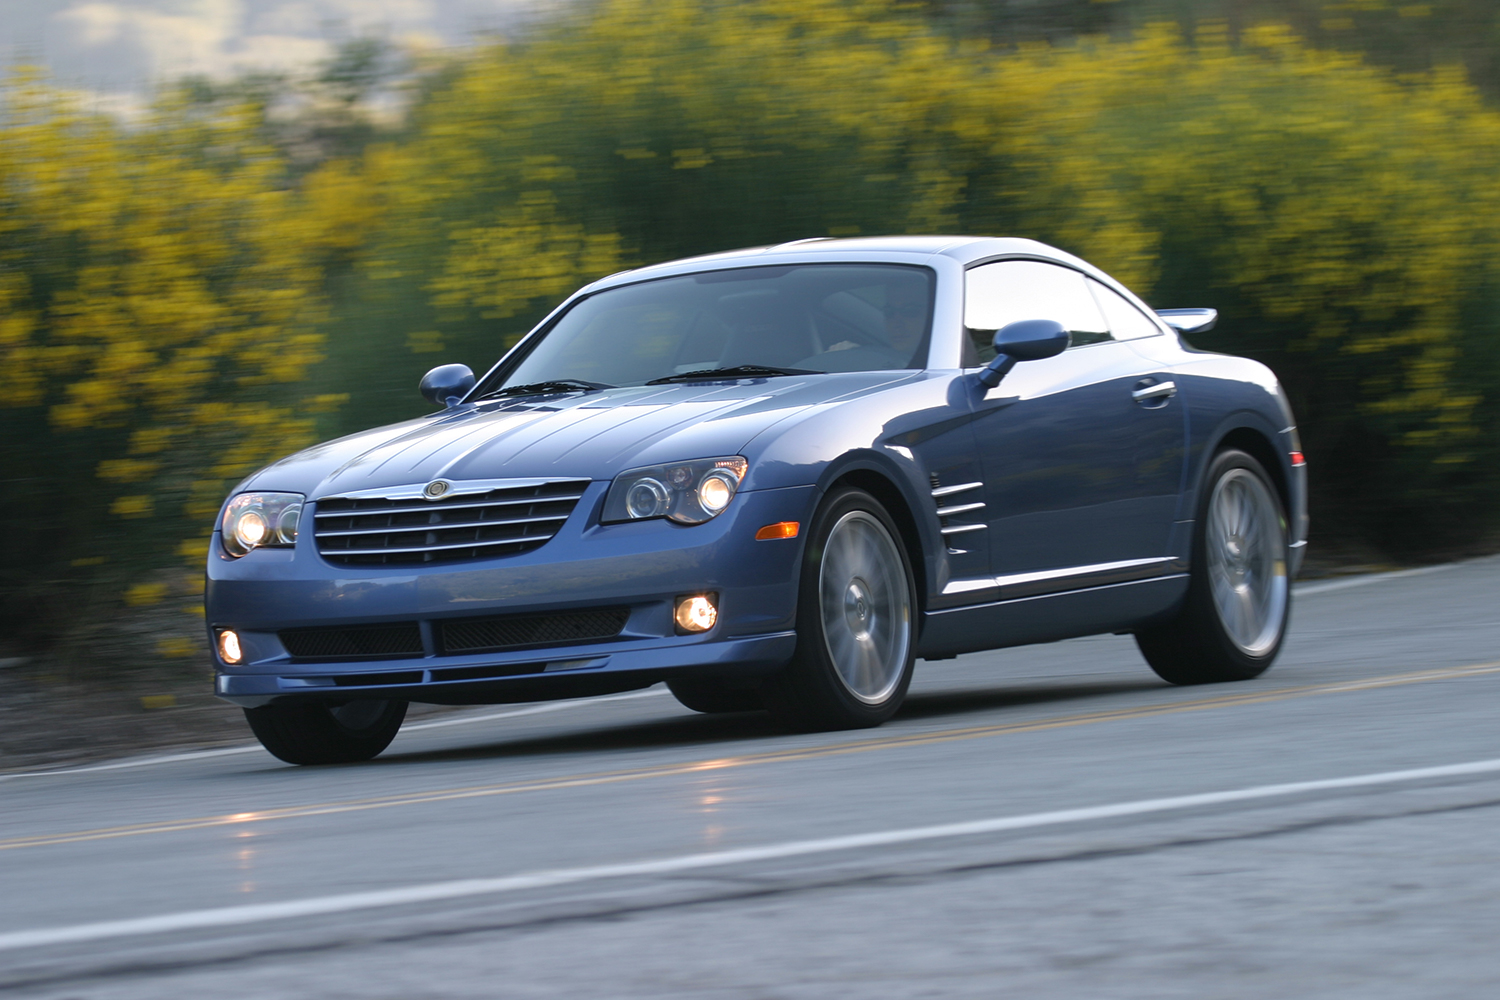 A 2005 Chrysler Crossfire SRT-6 driving down the road